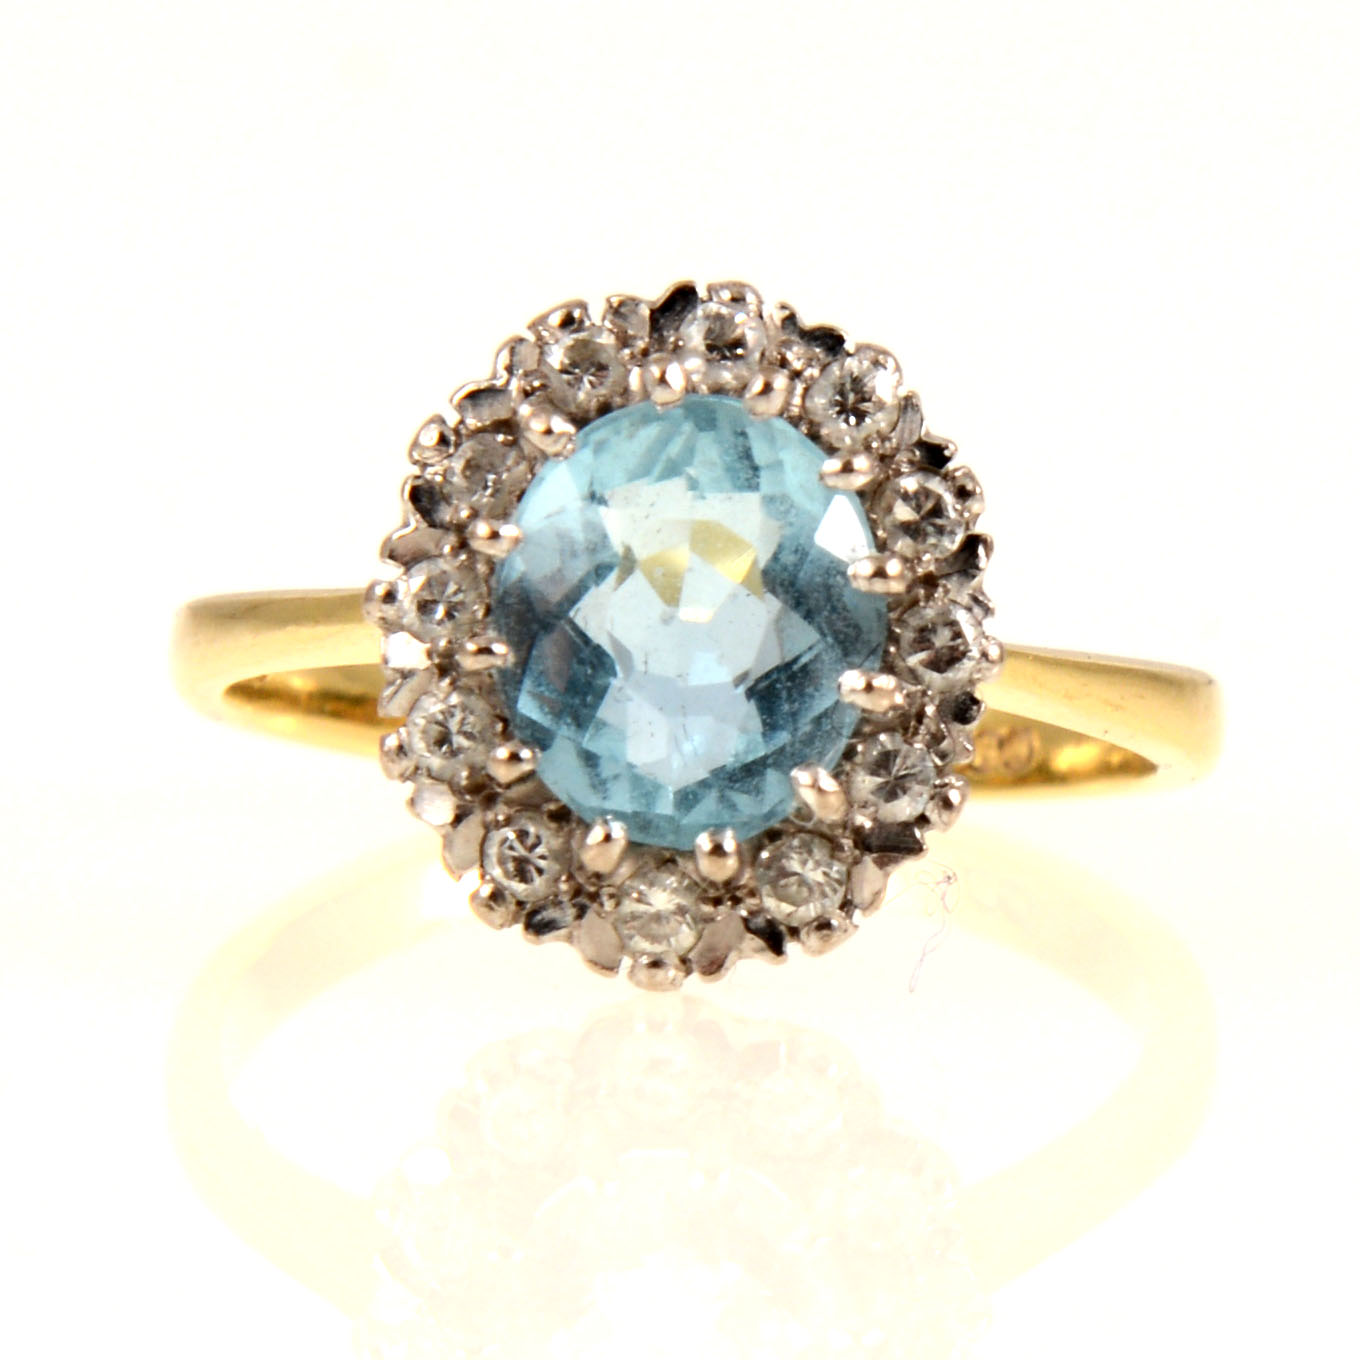 An aquamarine and diamond oval cluster ring.